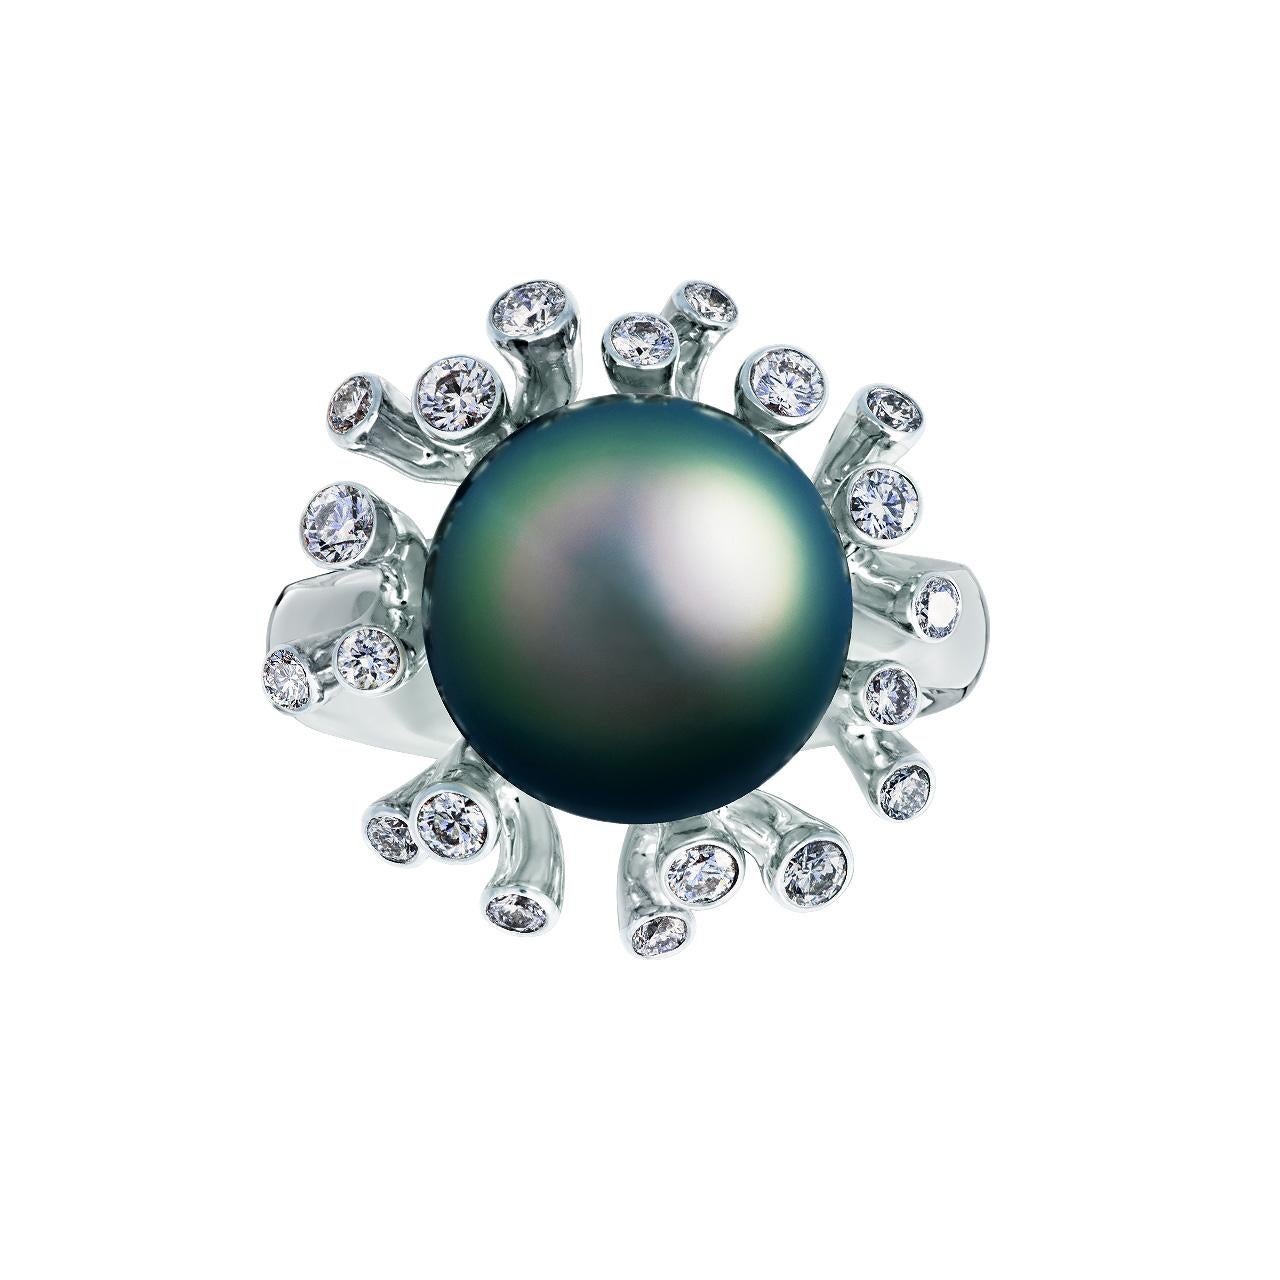 - 21 Round Diamonds - 0.46 ct, E-F/VS
- 10-10.5 mm Dark Tahitian pearl
- 18K White Gold 
- Weight: 9.66 g
- Size: 17 mm
This elegant ring from the Coral collection of Jewelry Theater features a lustrous Dark Tahitian pearl, surrounded with gold